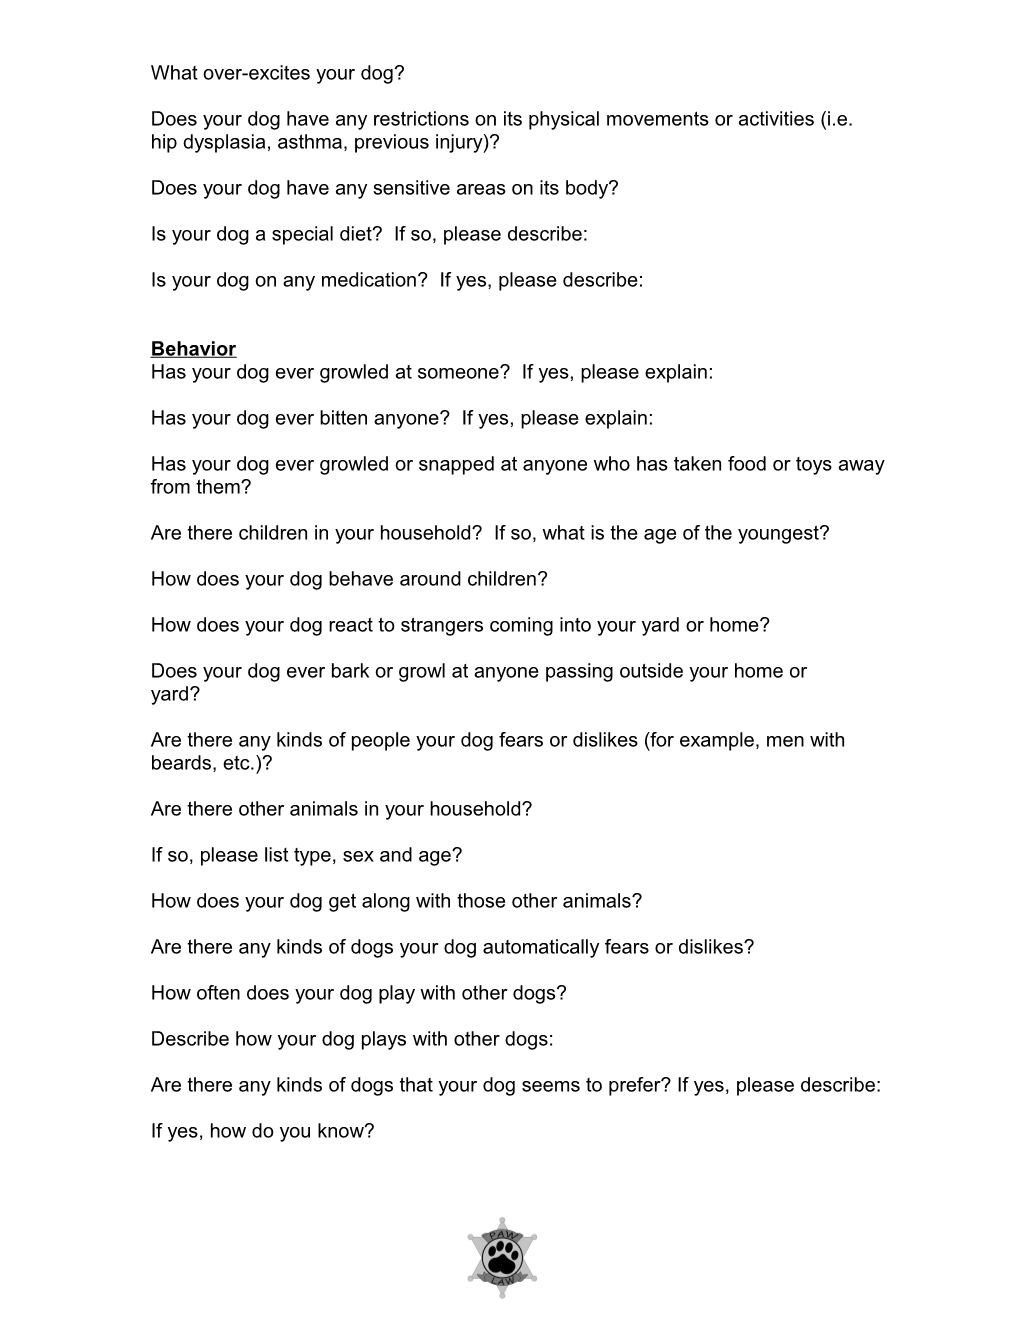 Paw Law Dog Training Academy Dog Personality Questionaire